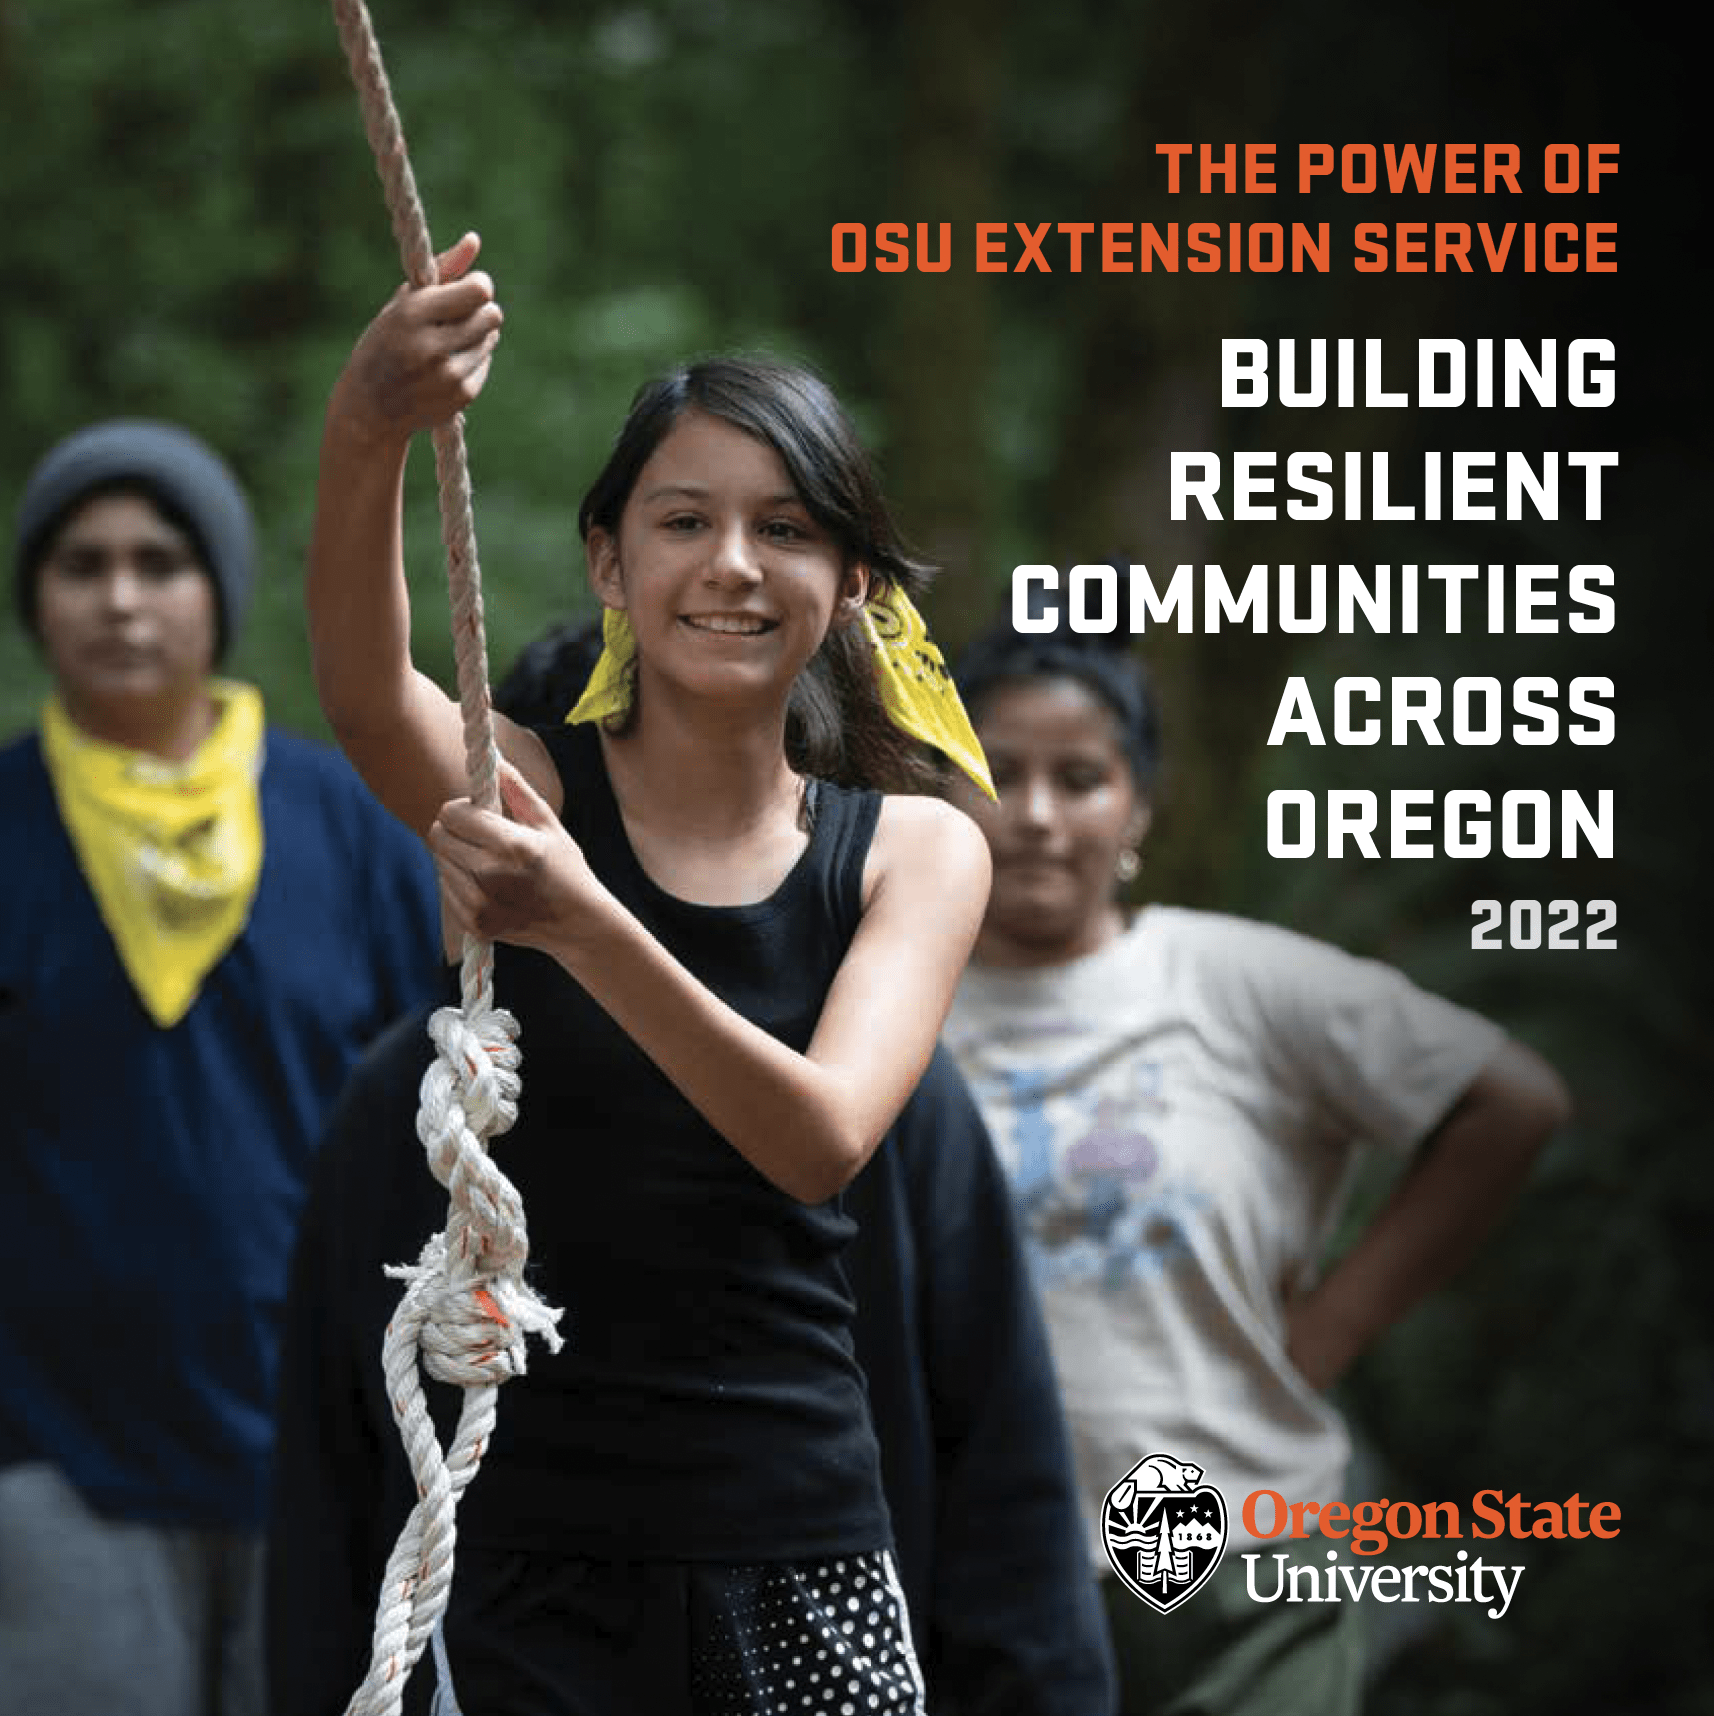 Image: 4-H girl grasping a rope swing "The power of OSU Extension Service: Building resilient communities across Oregon 2022. Oregon State University